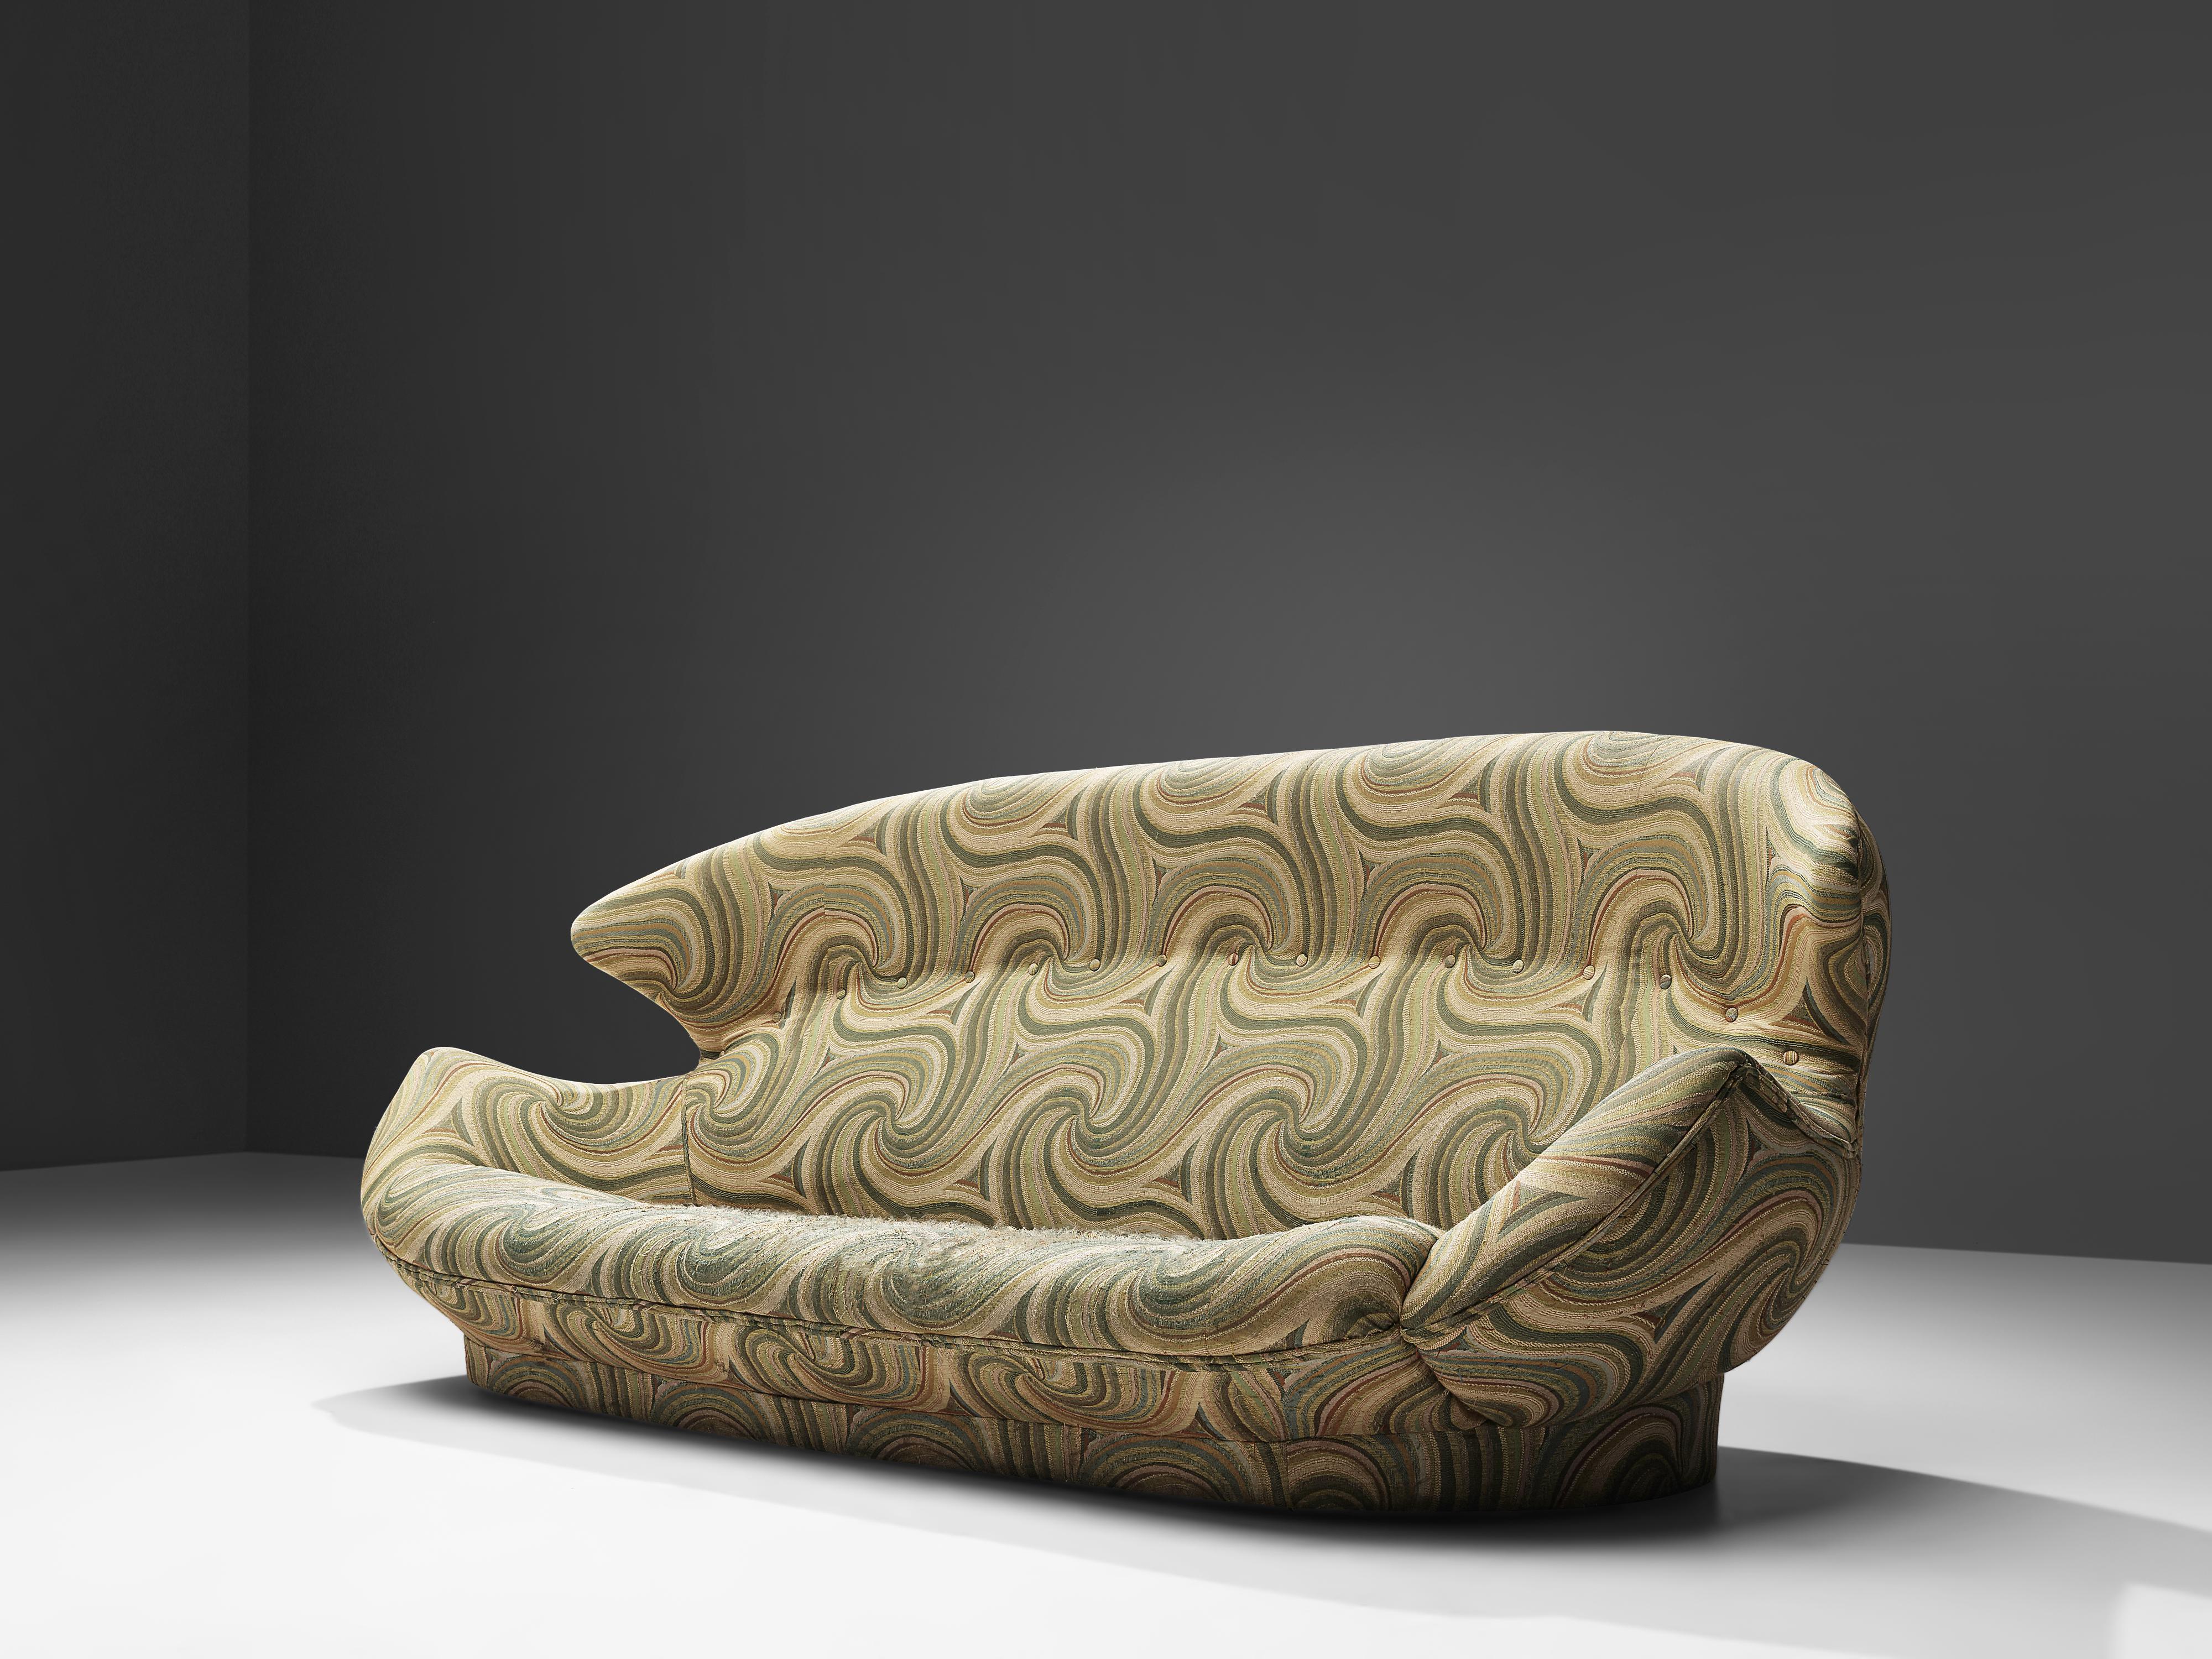 Two-seat sofa, green and cream patterned upholstery, Europe, 1970s

Comfortable winged sofa with hypnotizing and decorative patterned upholstery. The rounded overall shape of the sofa, with the wings reaching towards the armrests, ensures that the